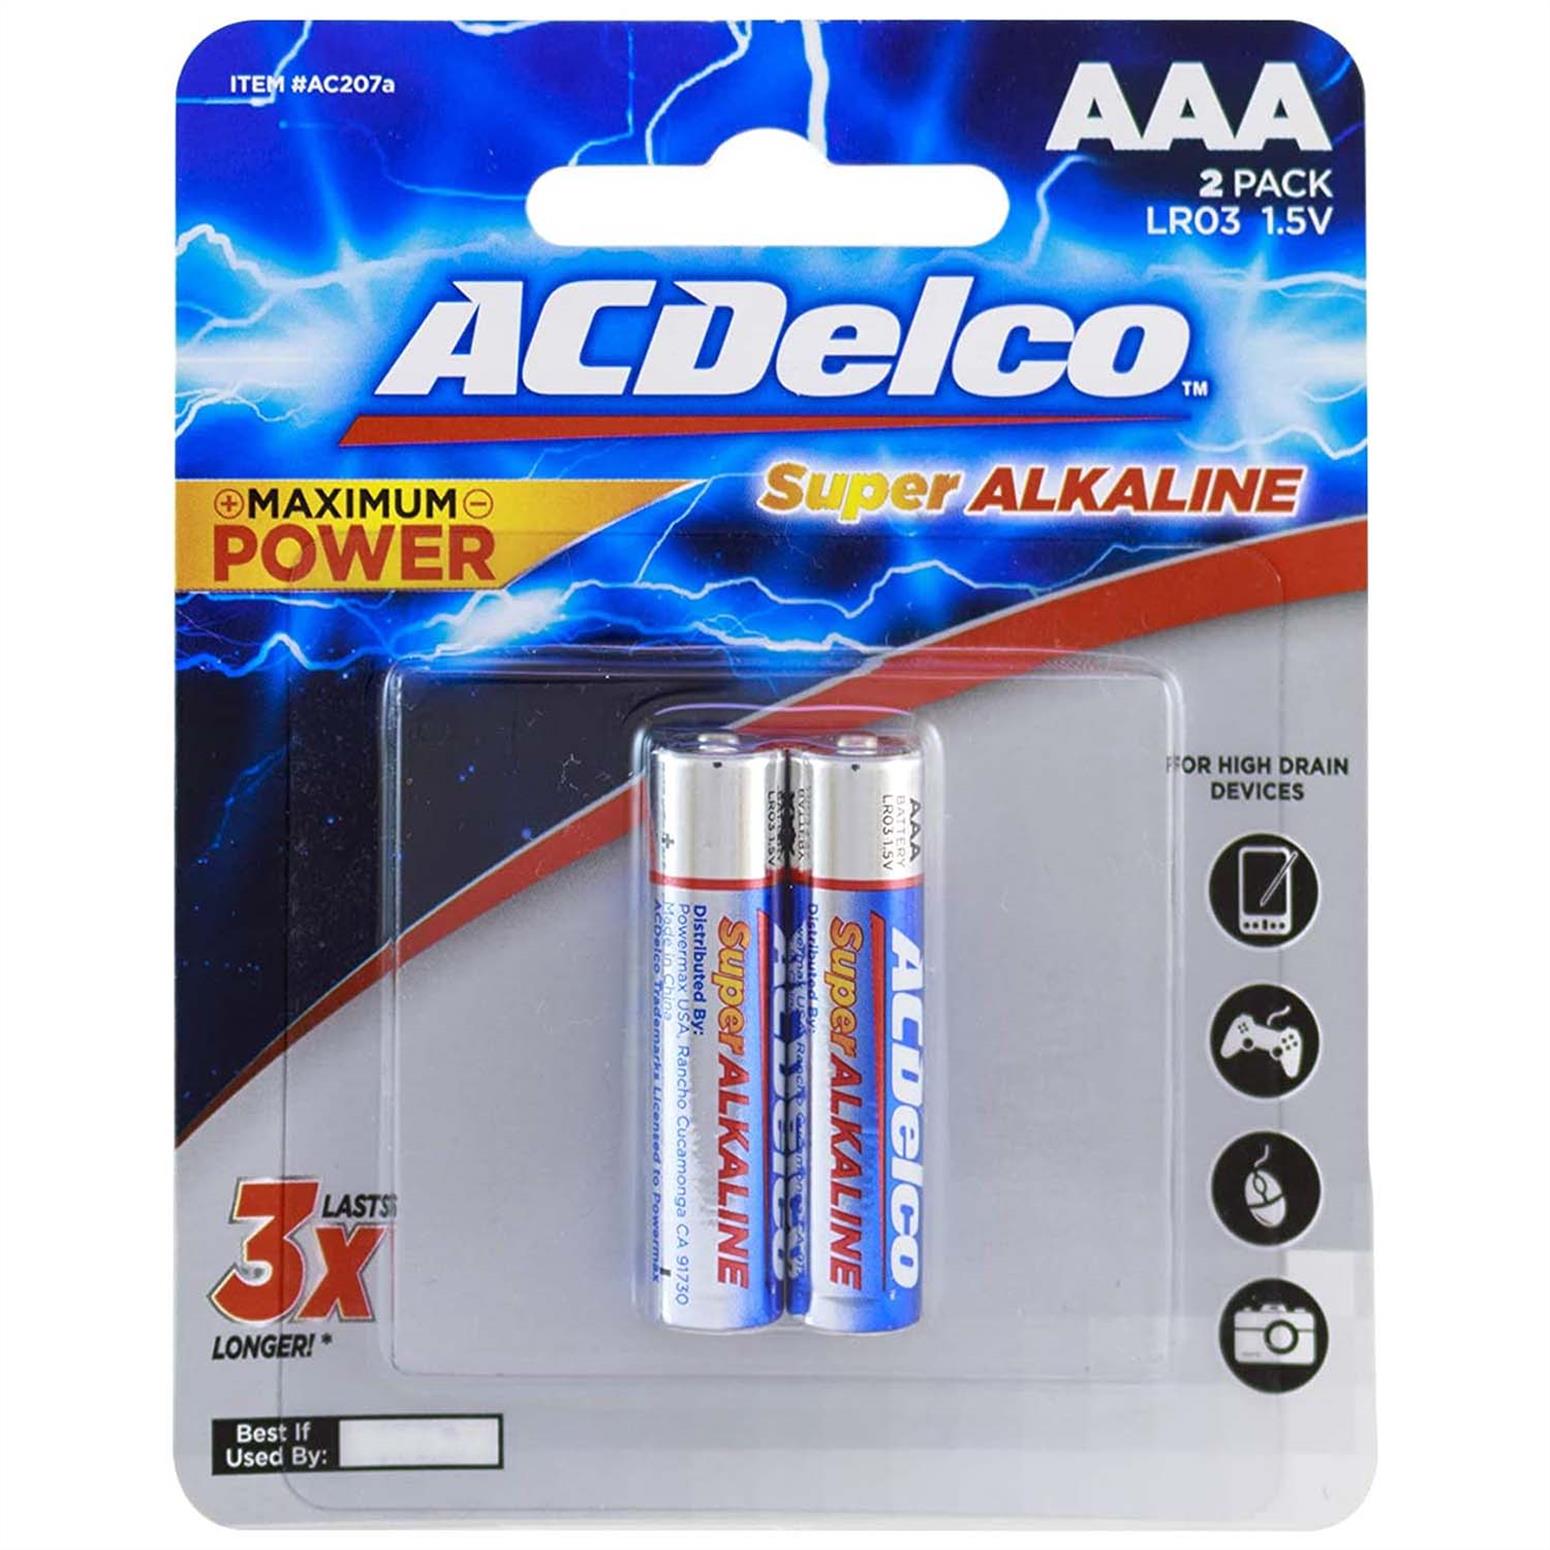 ACDelco Alkaline AAA Battery Pack of 2 Pieces